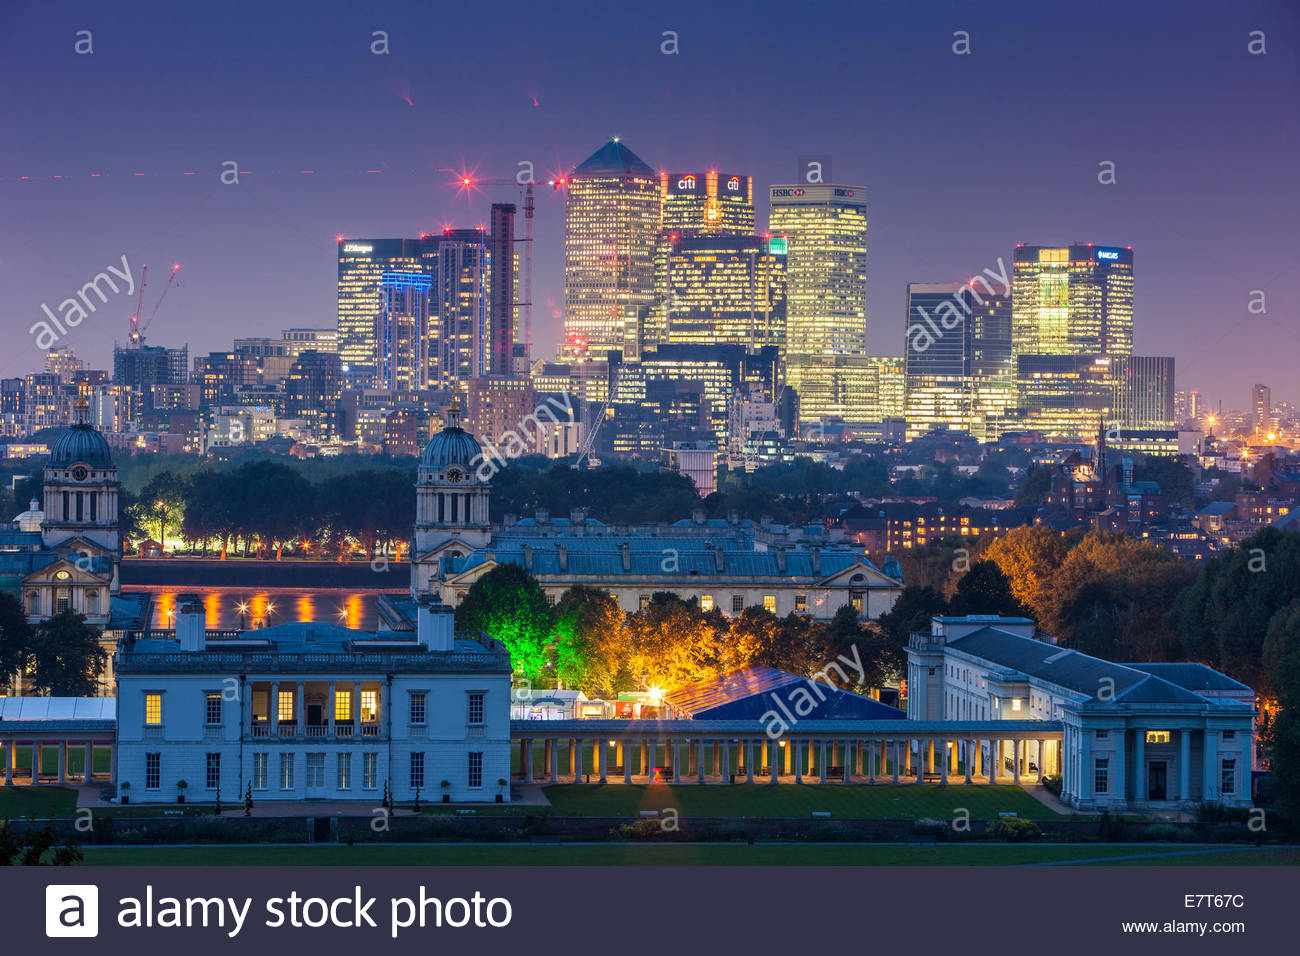 Canary Wharf And The London City Tower Background With Old